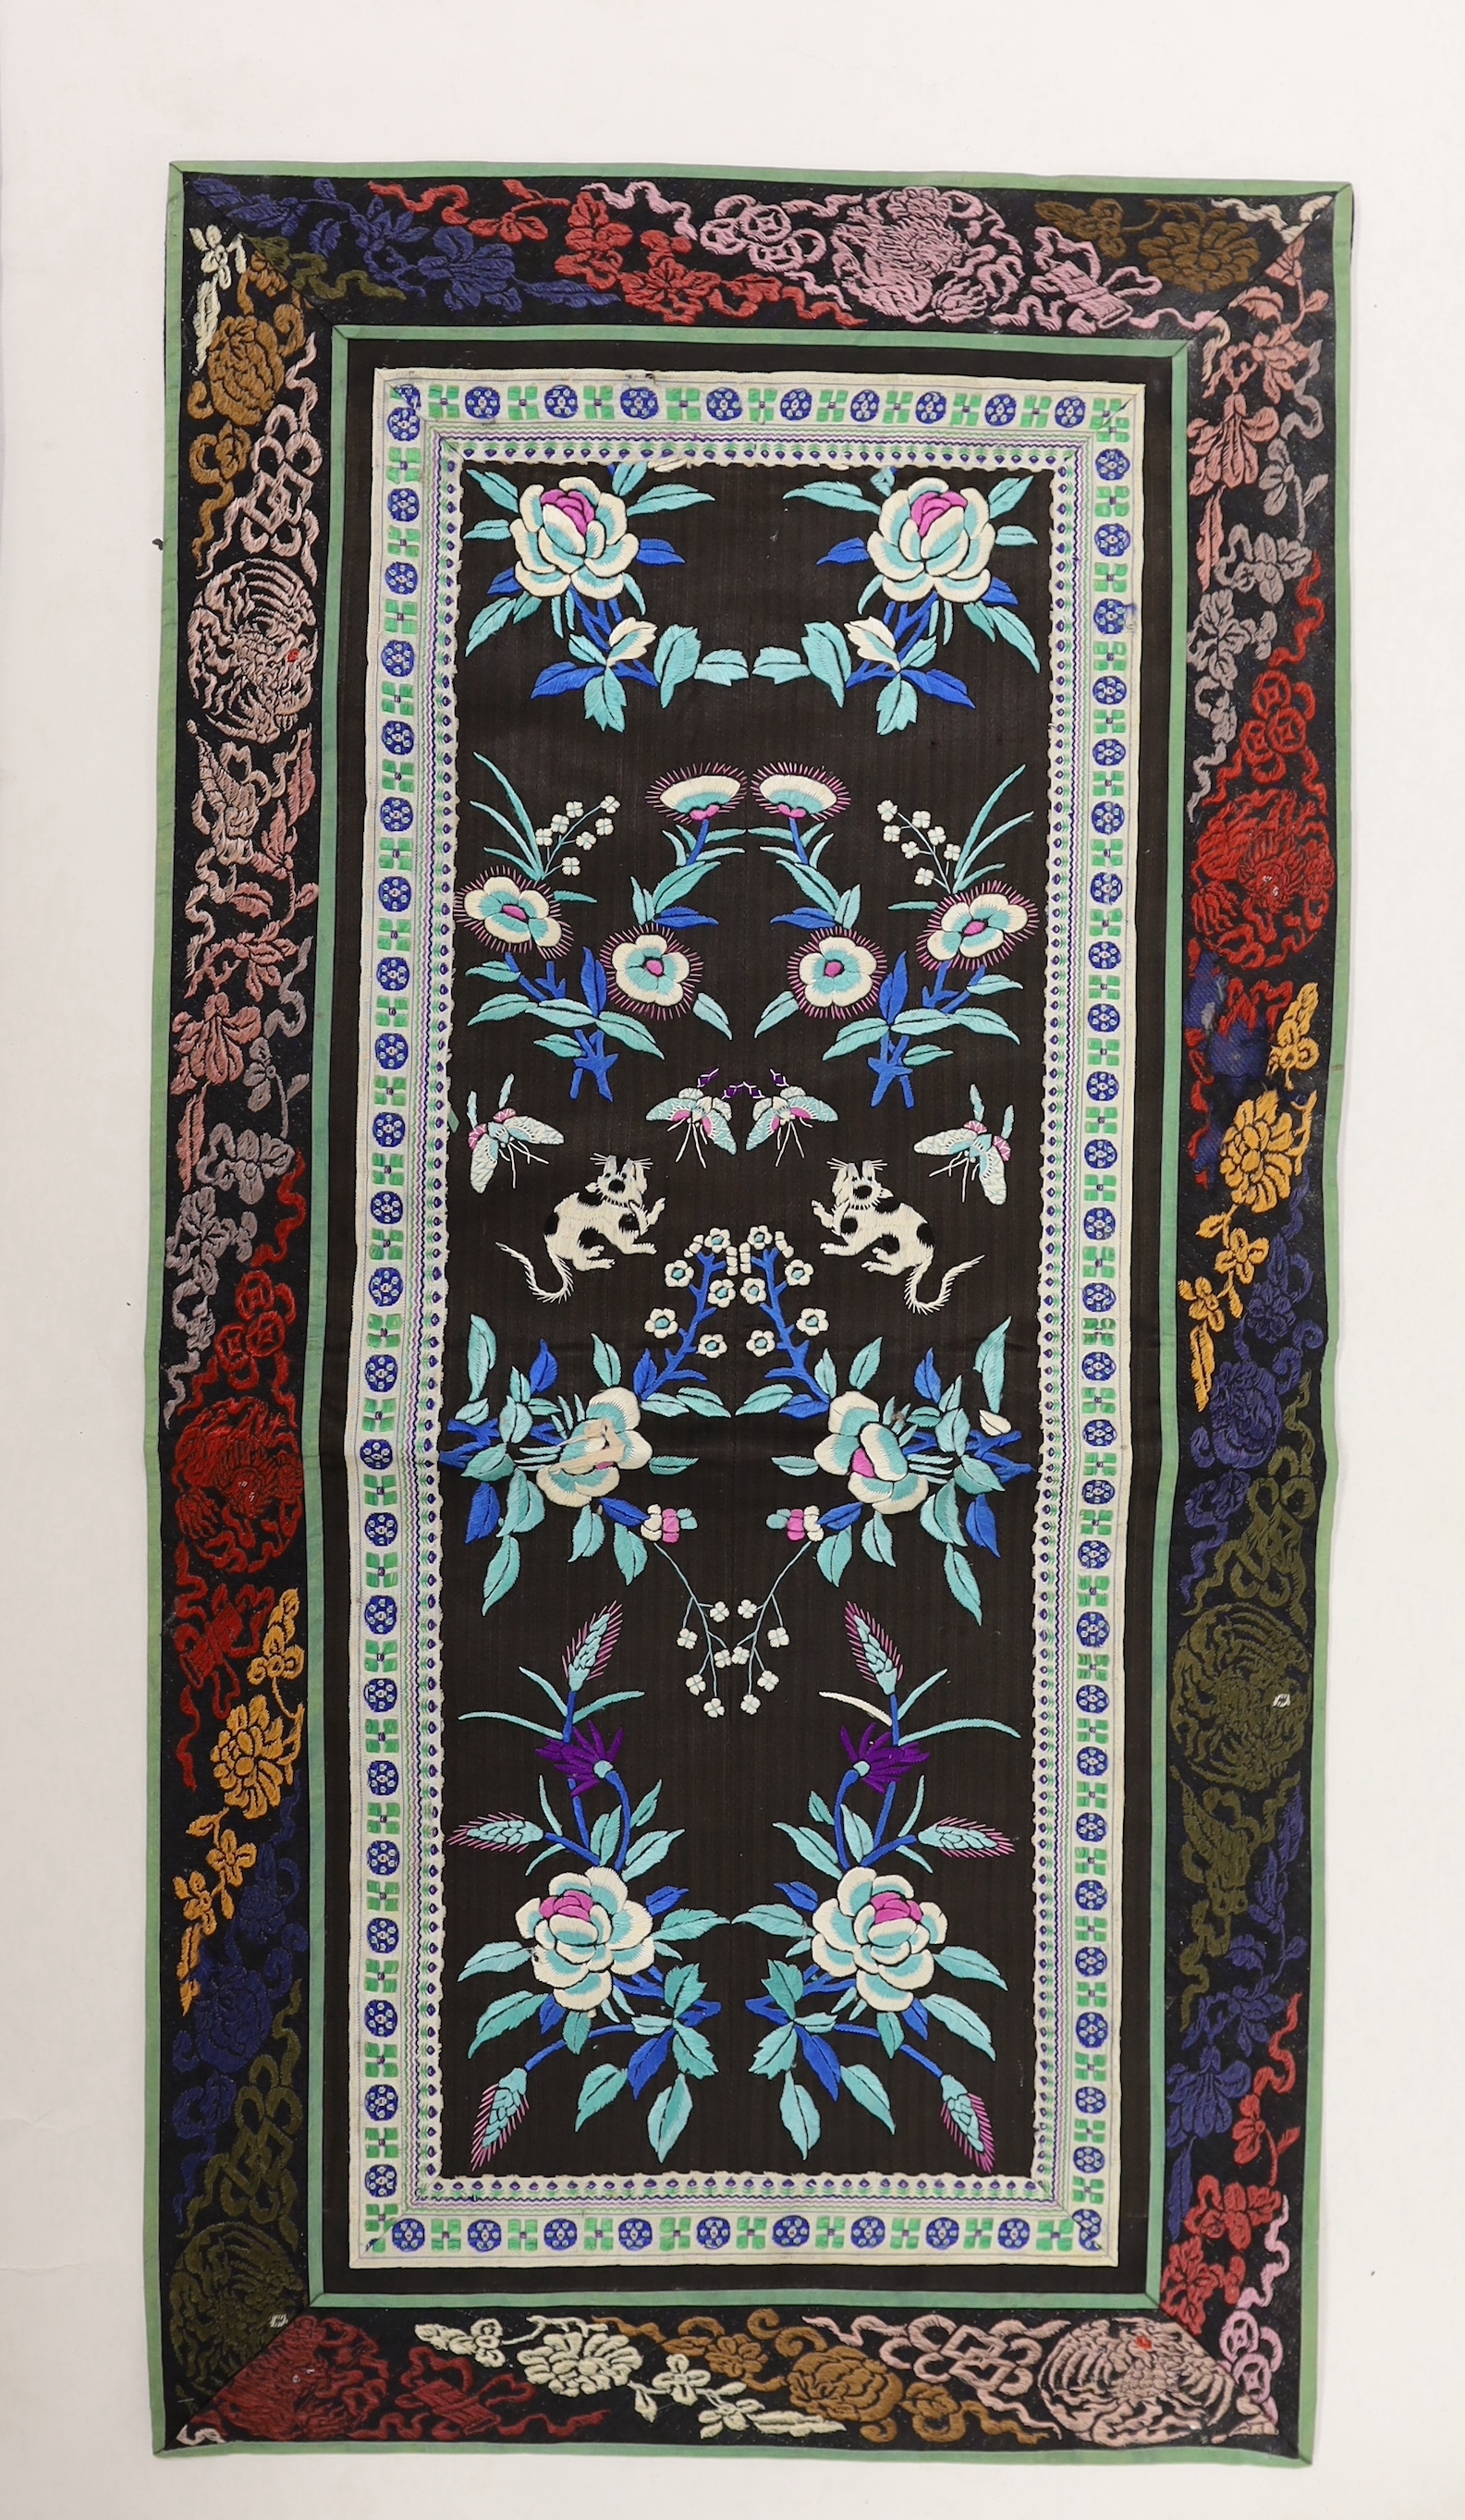 A pair of Chinese gold thread embroidered sleeve bands stitched together as an item with brocade border and a pair of polychrome embroidered sleeve bands with cats, butterflies and flowers also with brocade borders, long